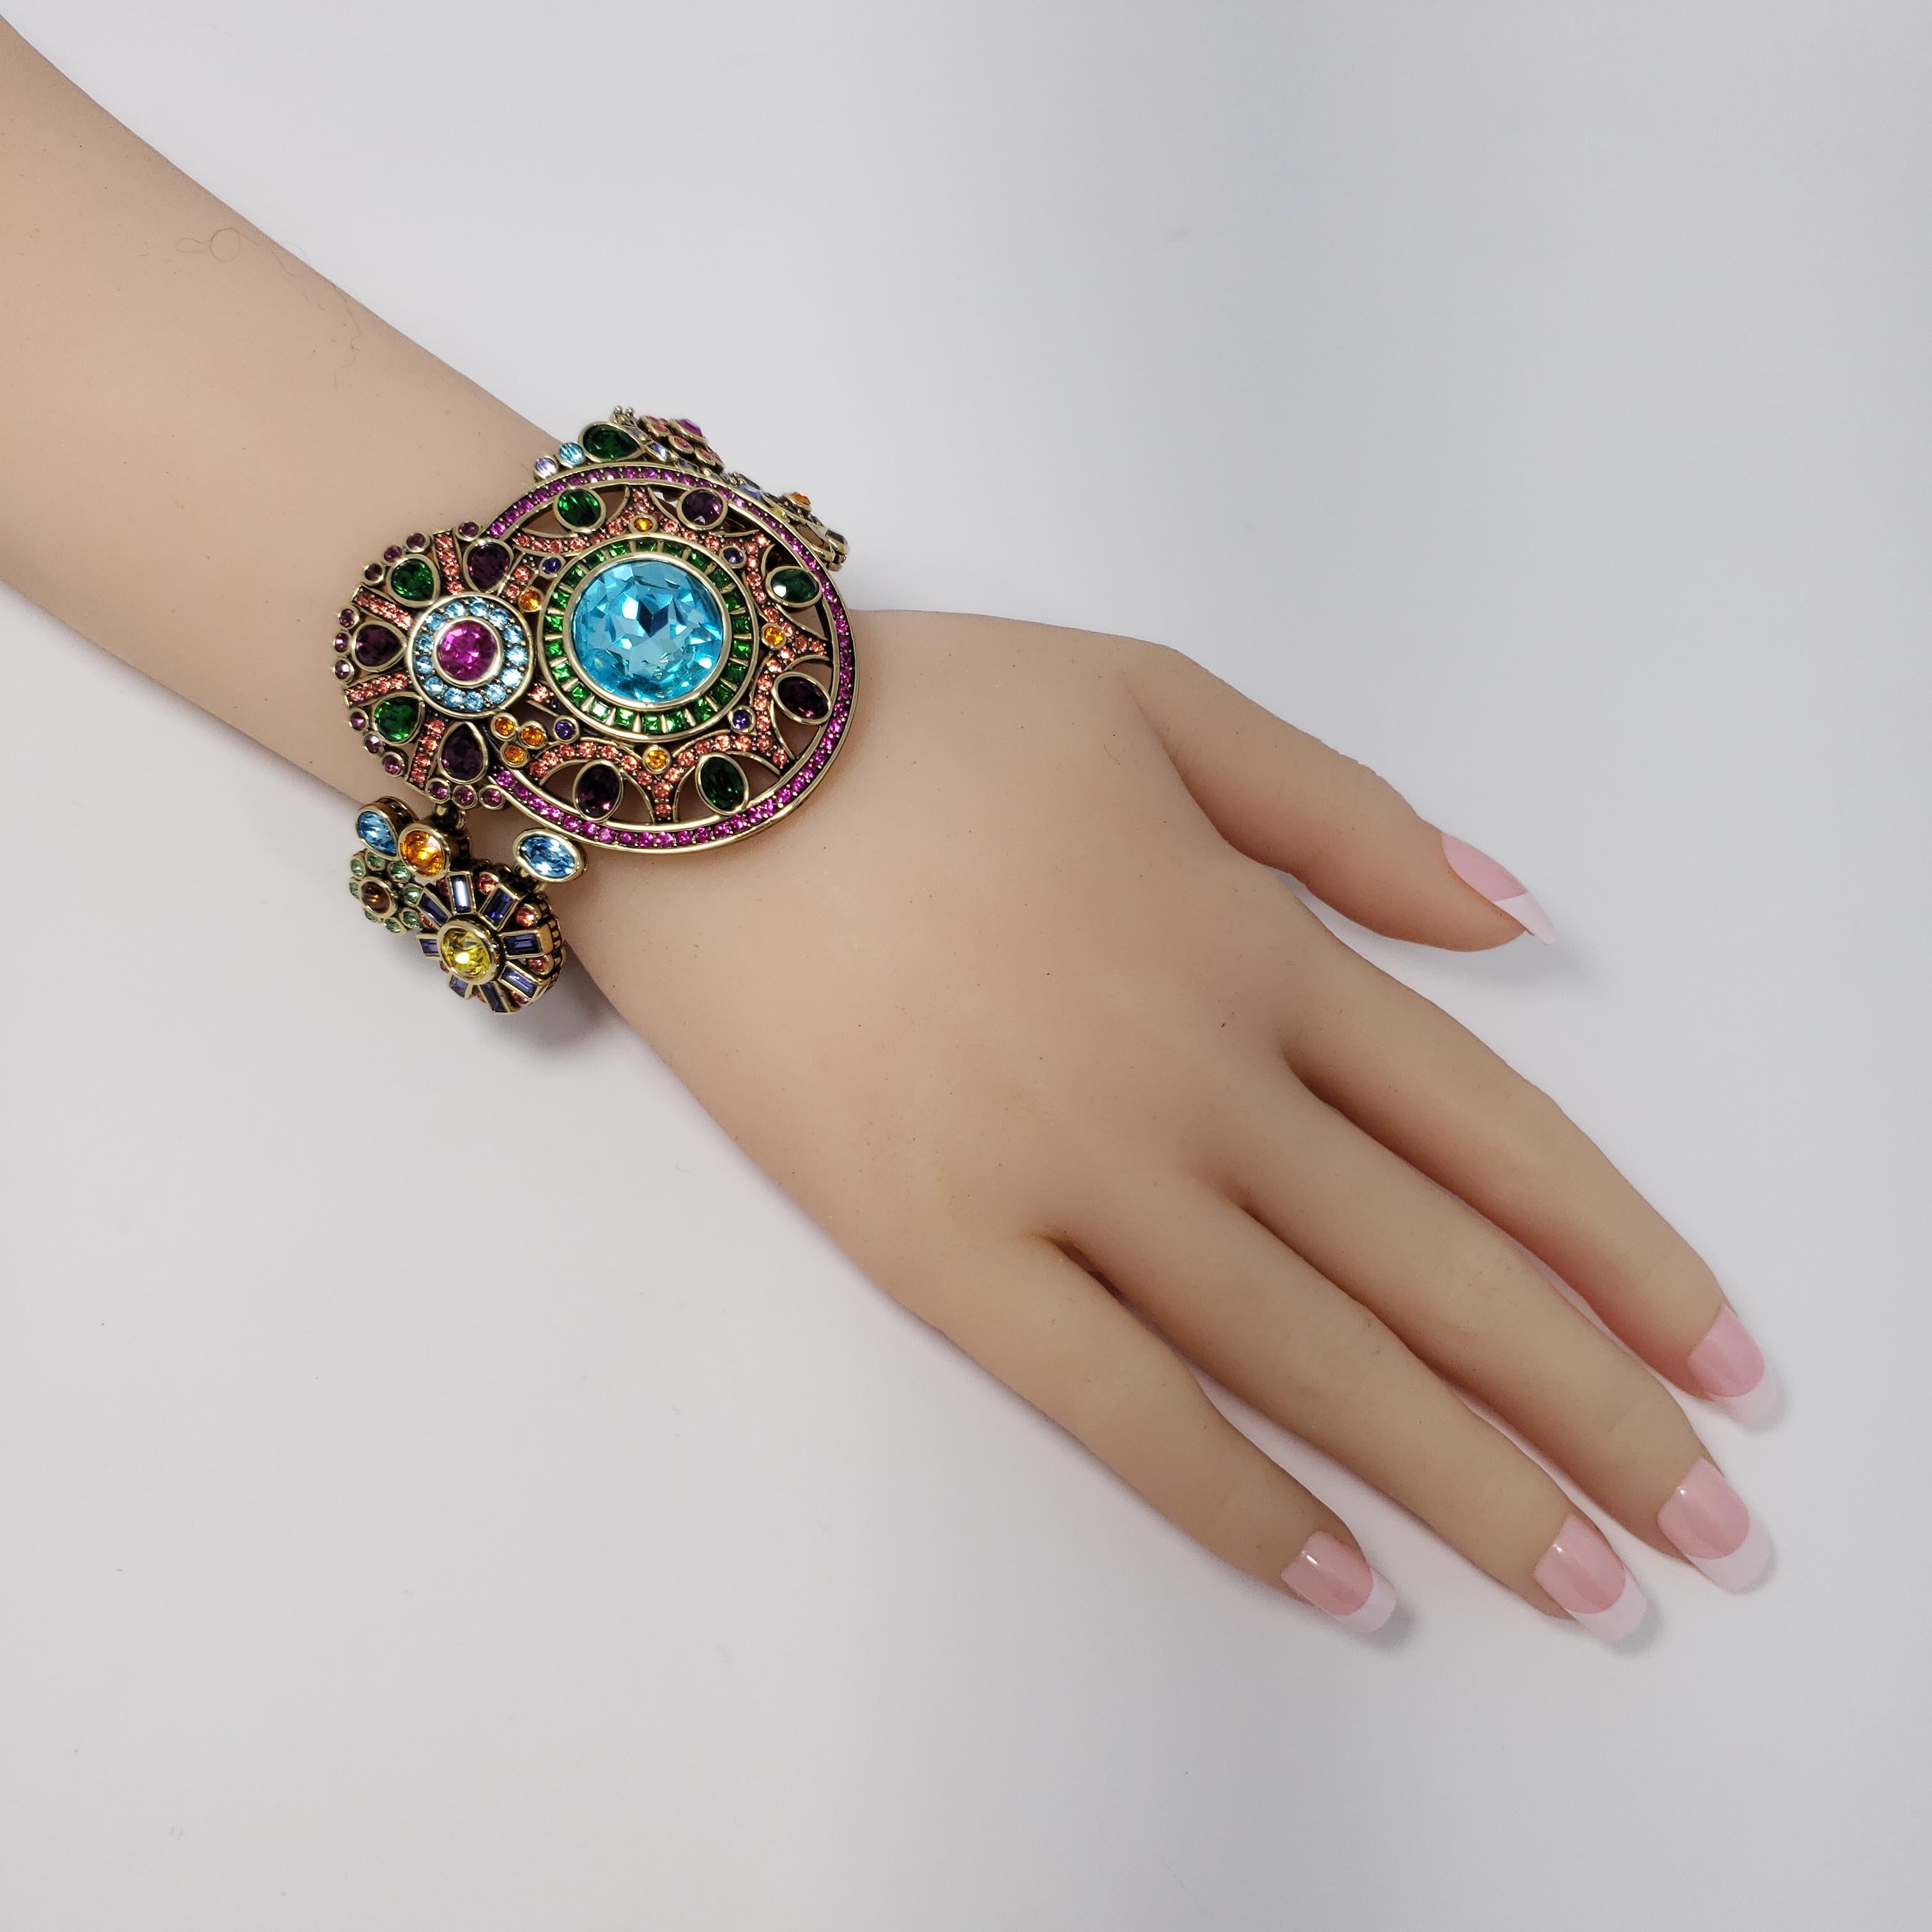 Heidi Daus ornate link toggle clasp bracelet. Features an assortment of round flower motifs decorated with vibrant and colorful crystals. Aquamarine, emerald, amethyst, rose, and other decorative crystal stones bring this mesmerizing bracelet to